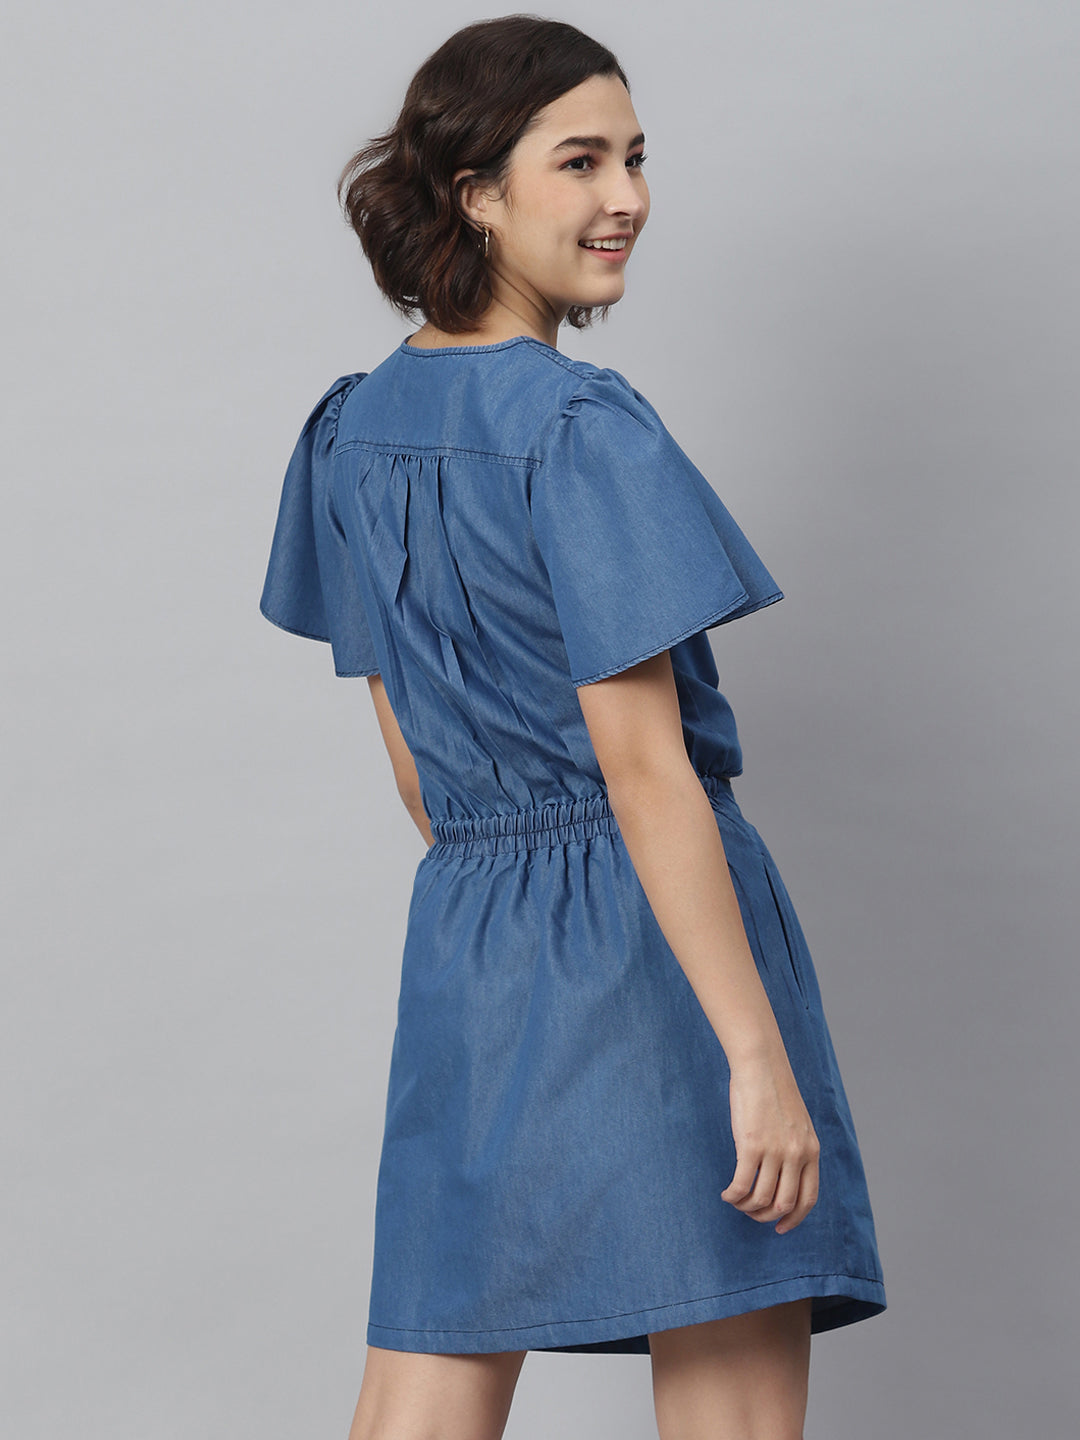 Blue Denim Tie Knot Top and attached Skirt Dress